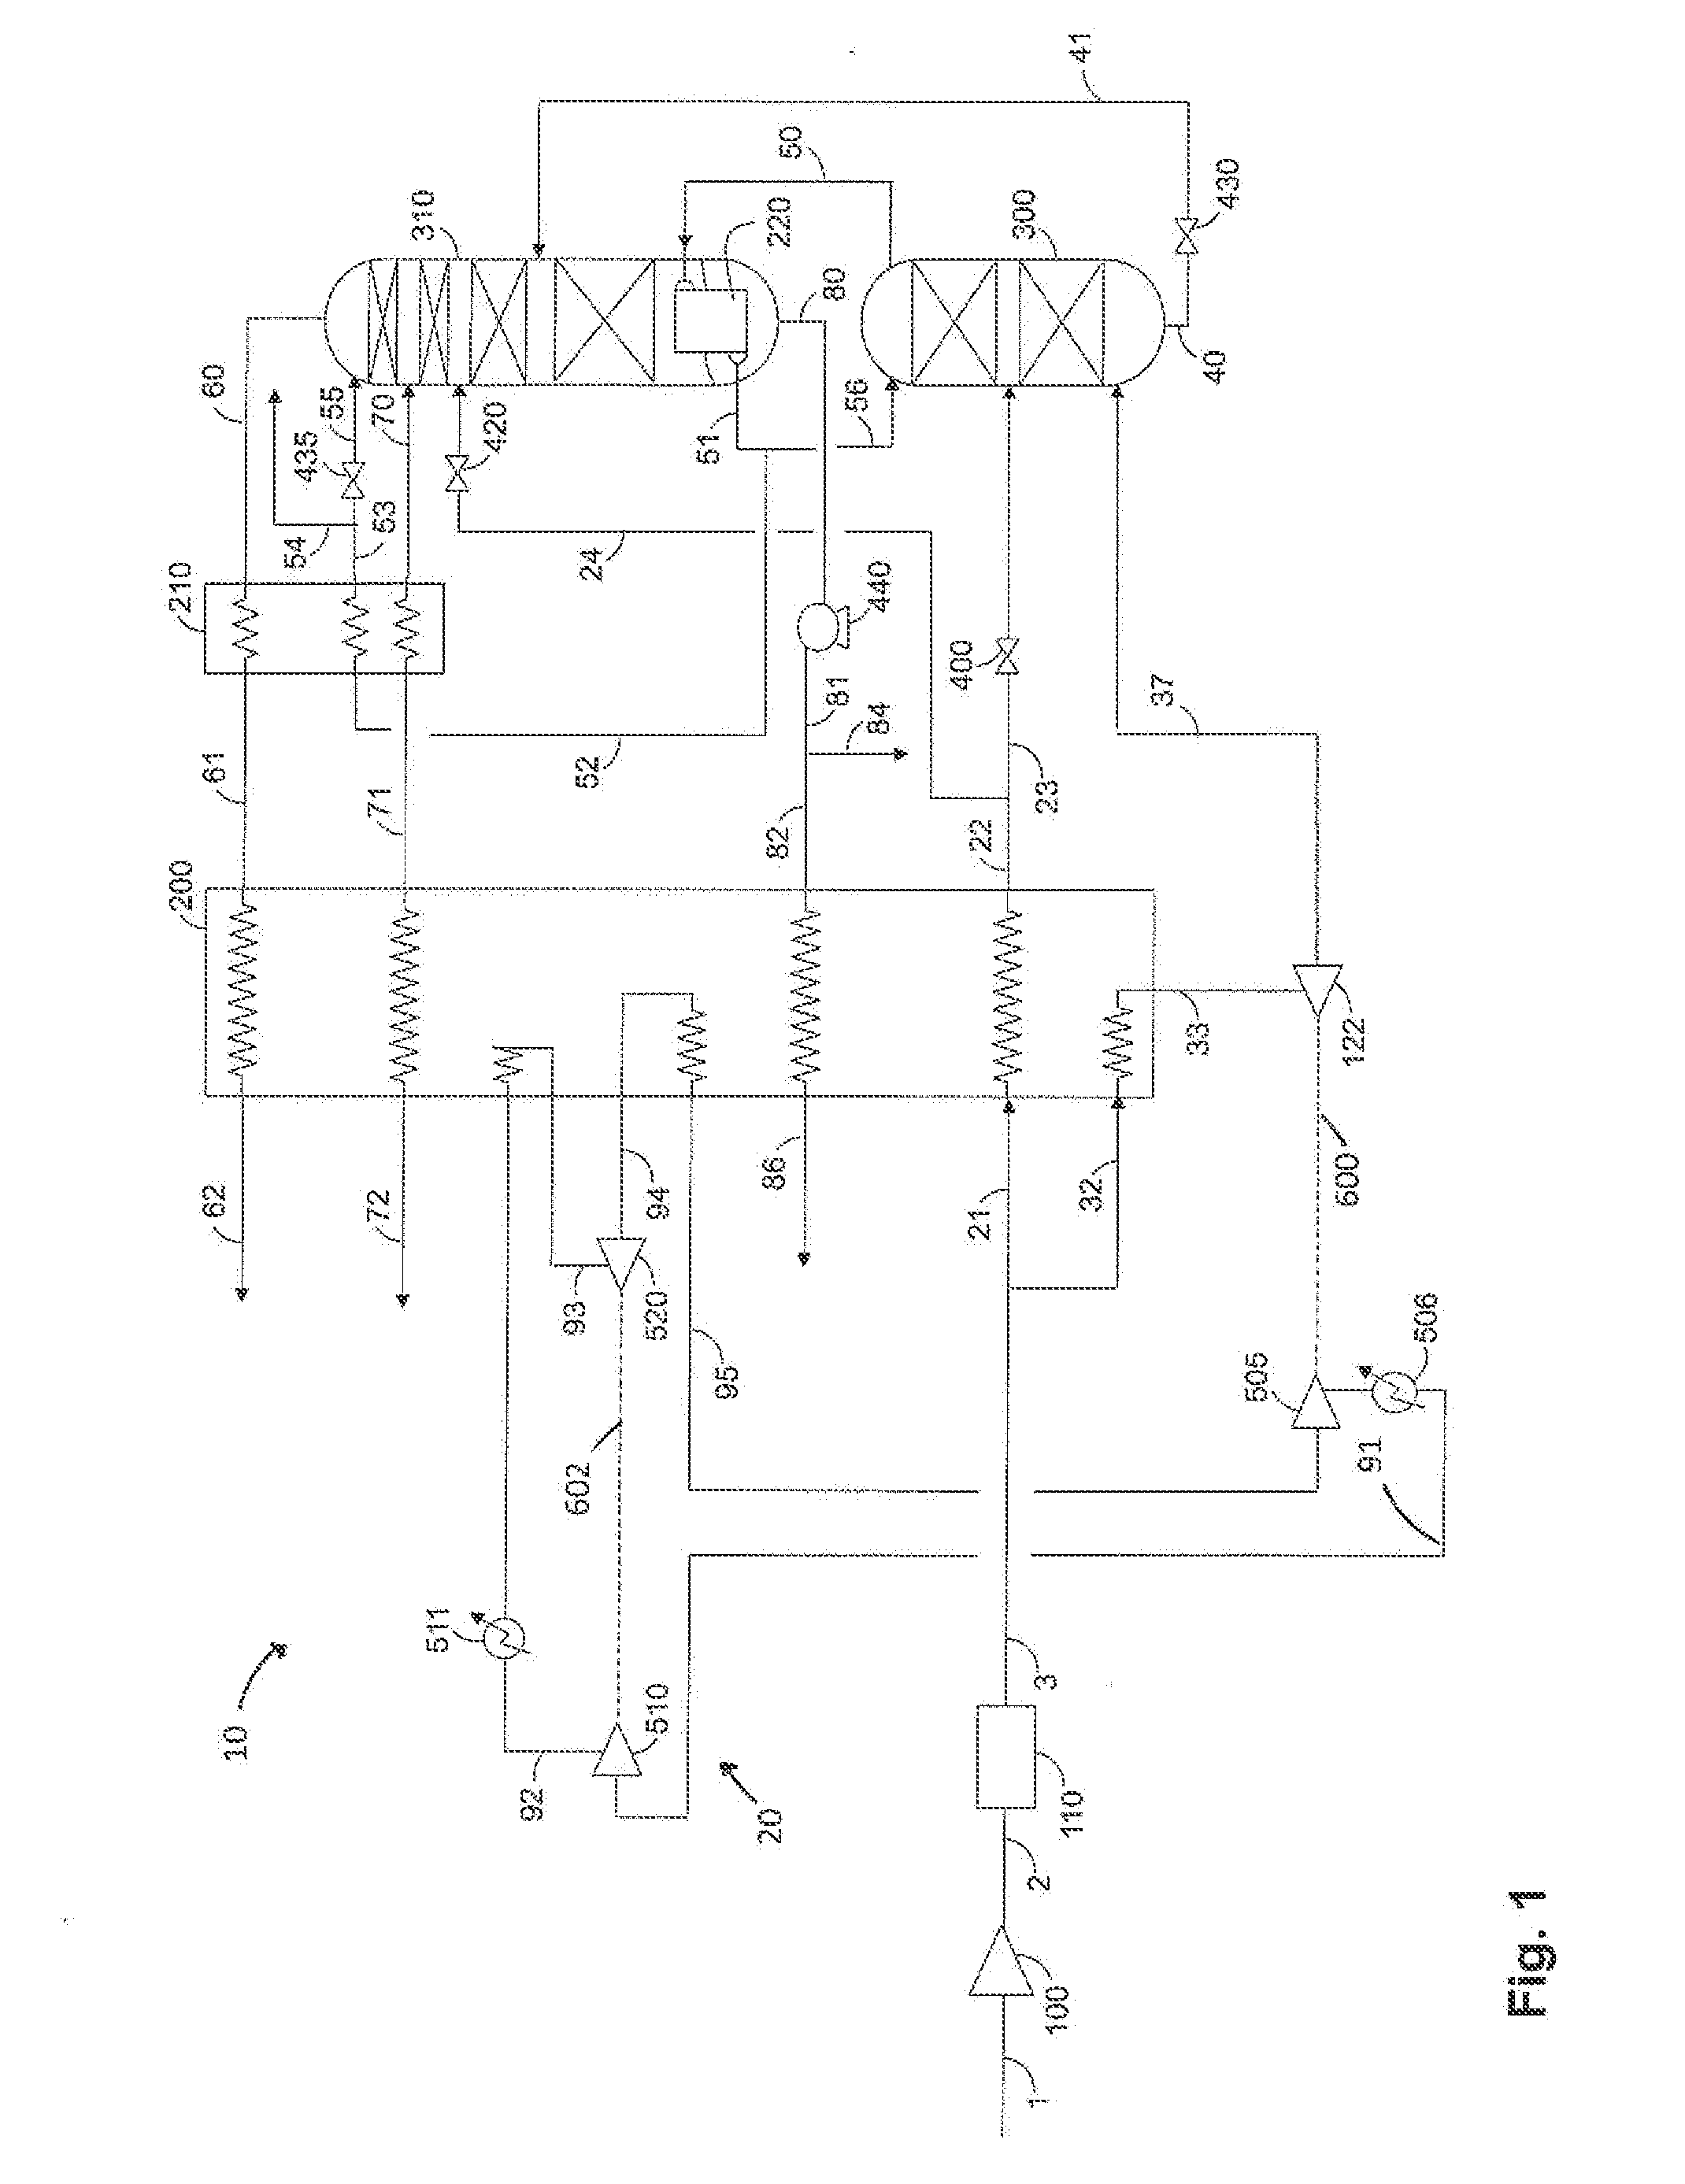 System and method for integrated air separation and liquefaction